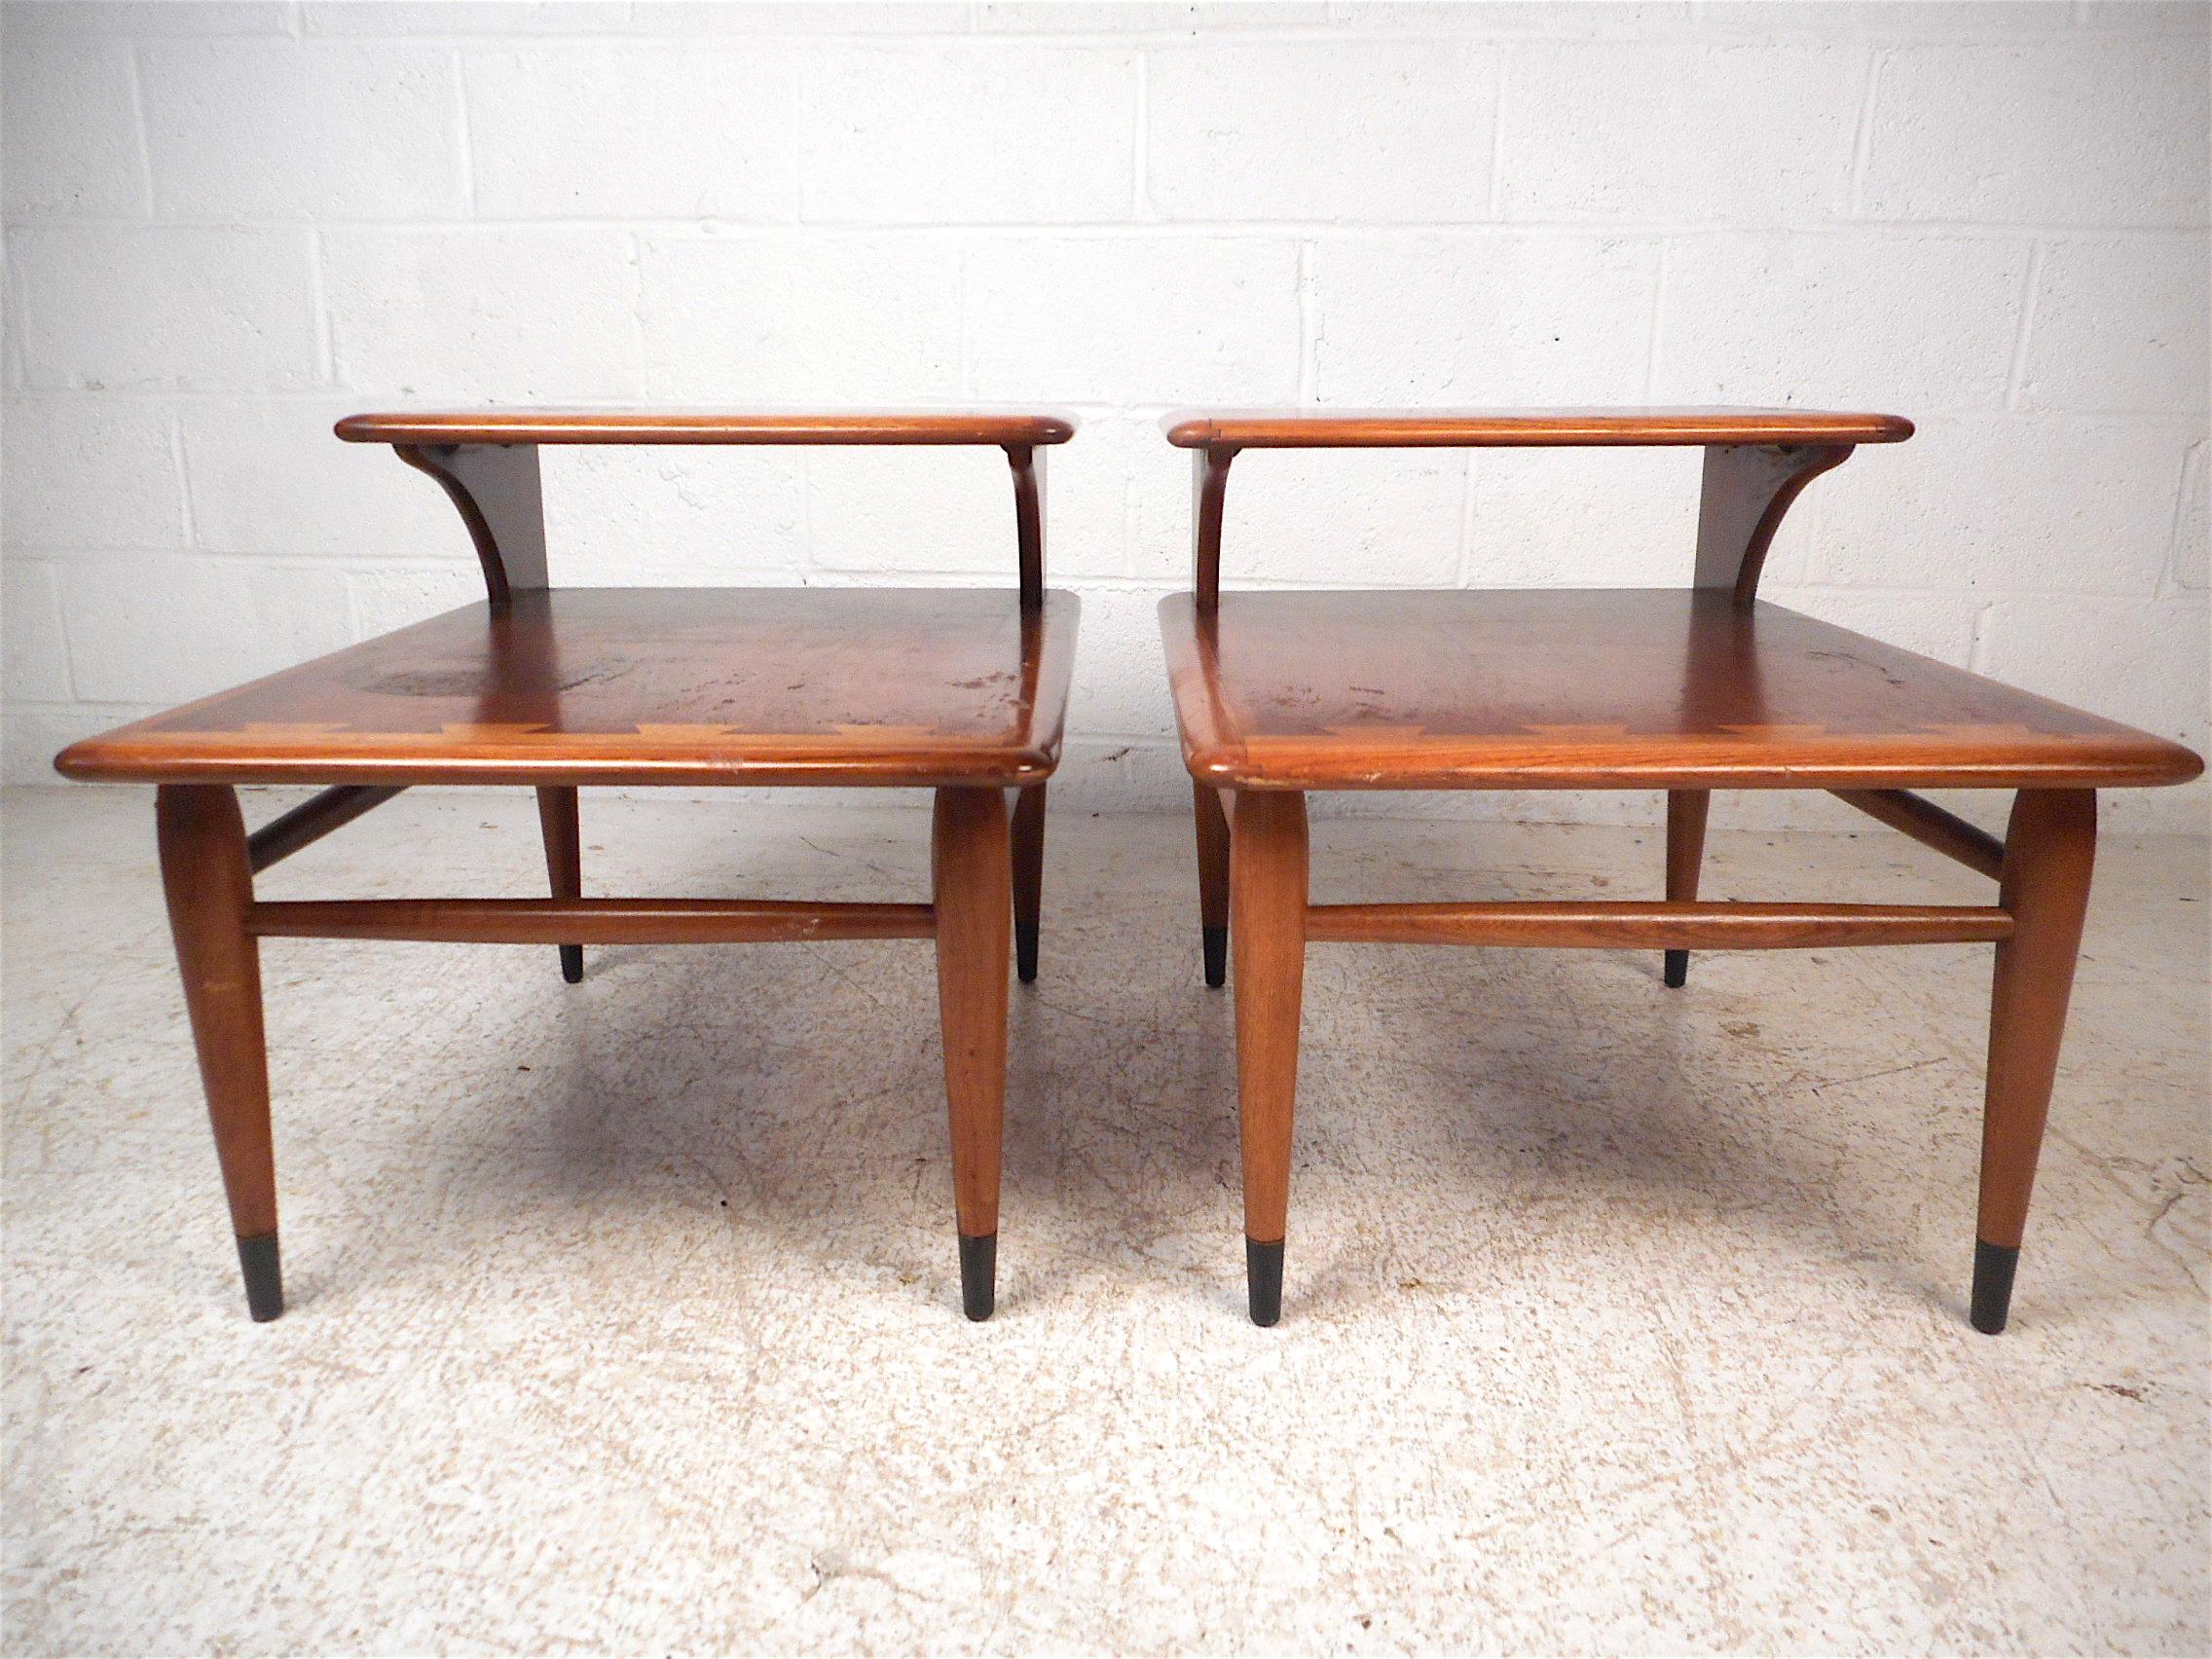 Stylish pair of two-tiered end tables made by Lane Furniture. Part of lane's 